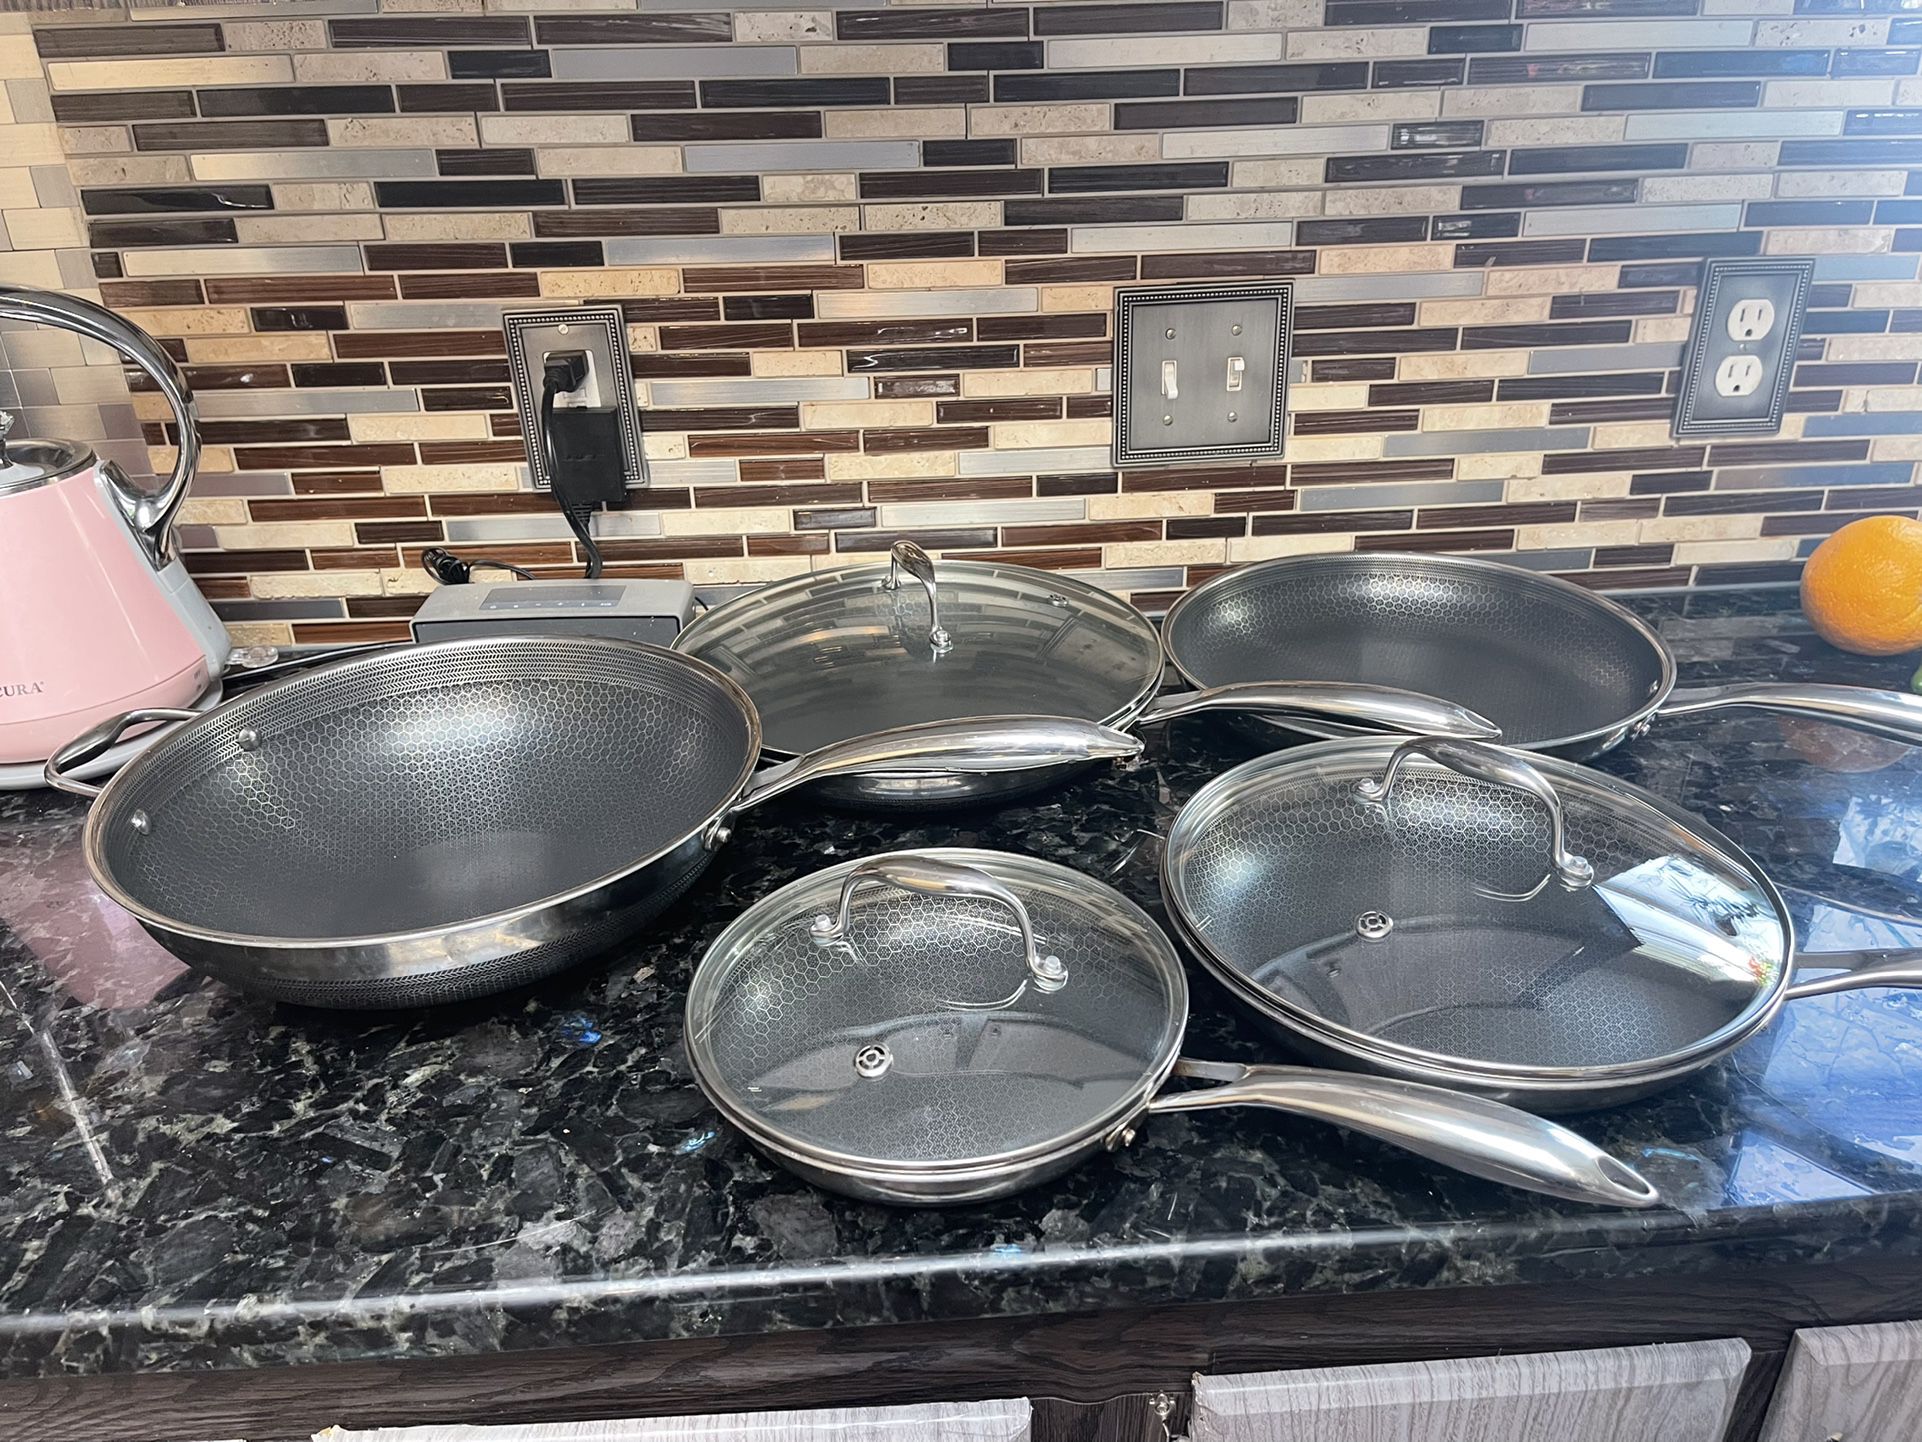 8 Piece hexclad Hybrid Cookware Set for Sale in Federal Way, WA - OfferUp